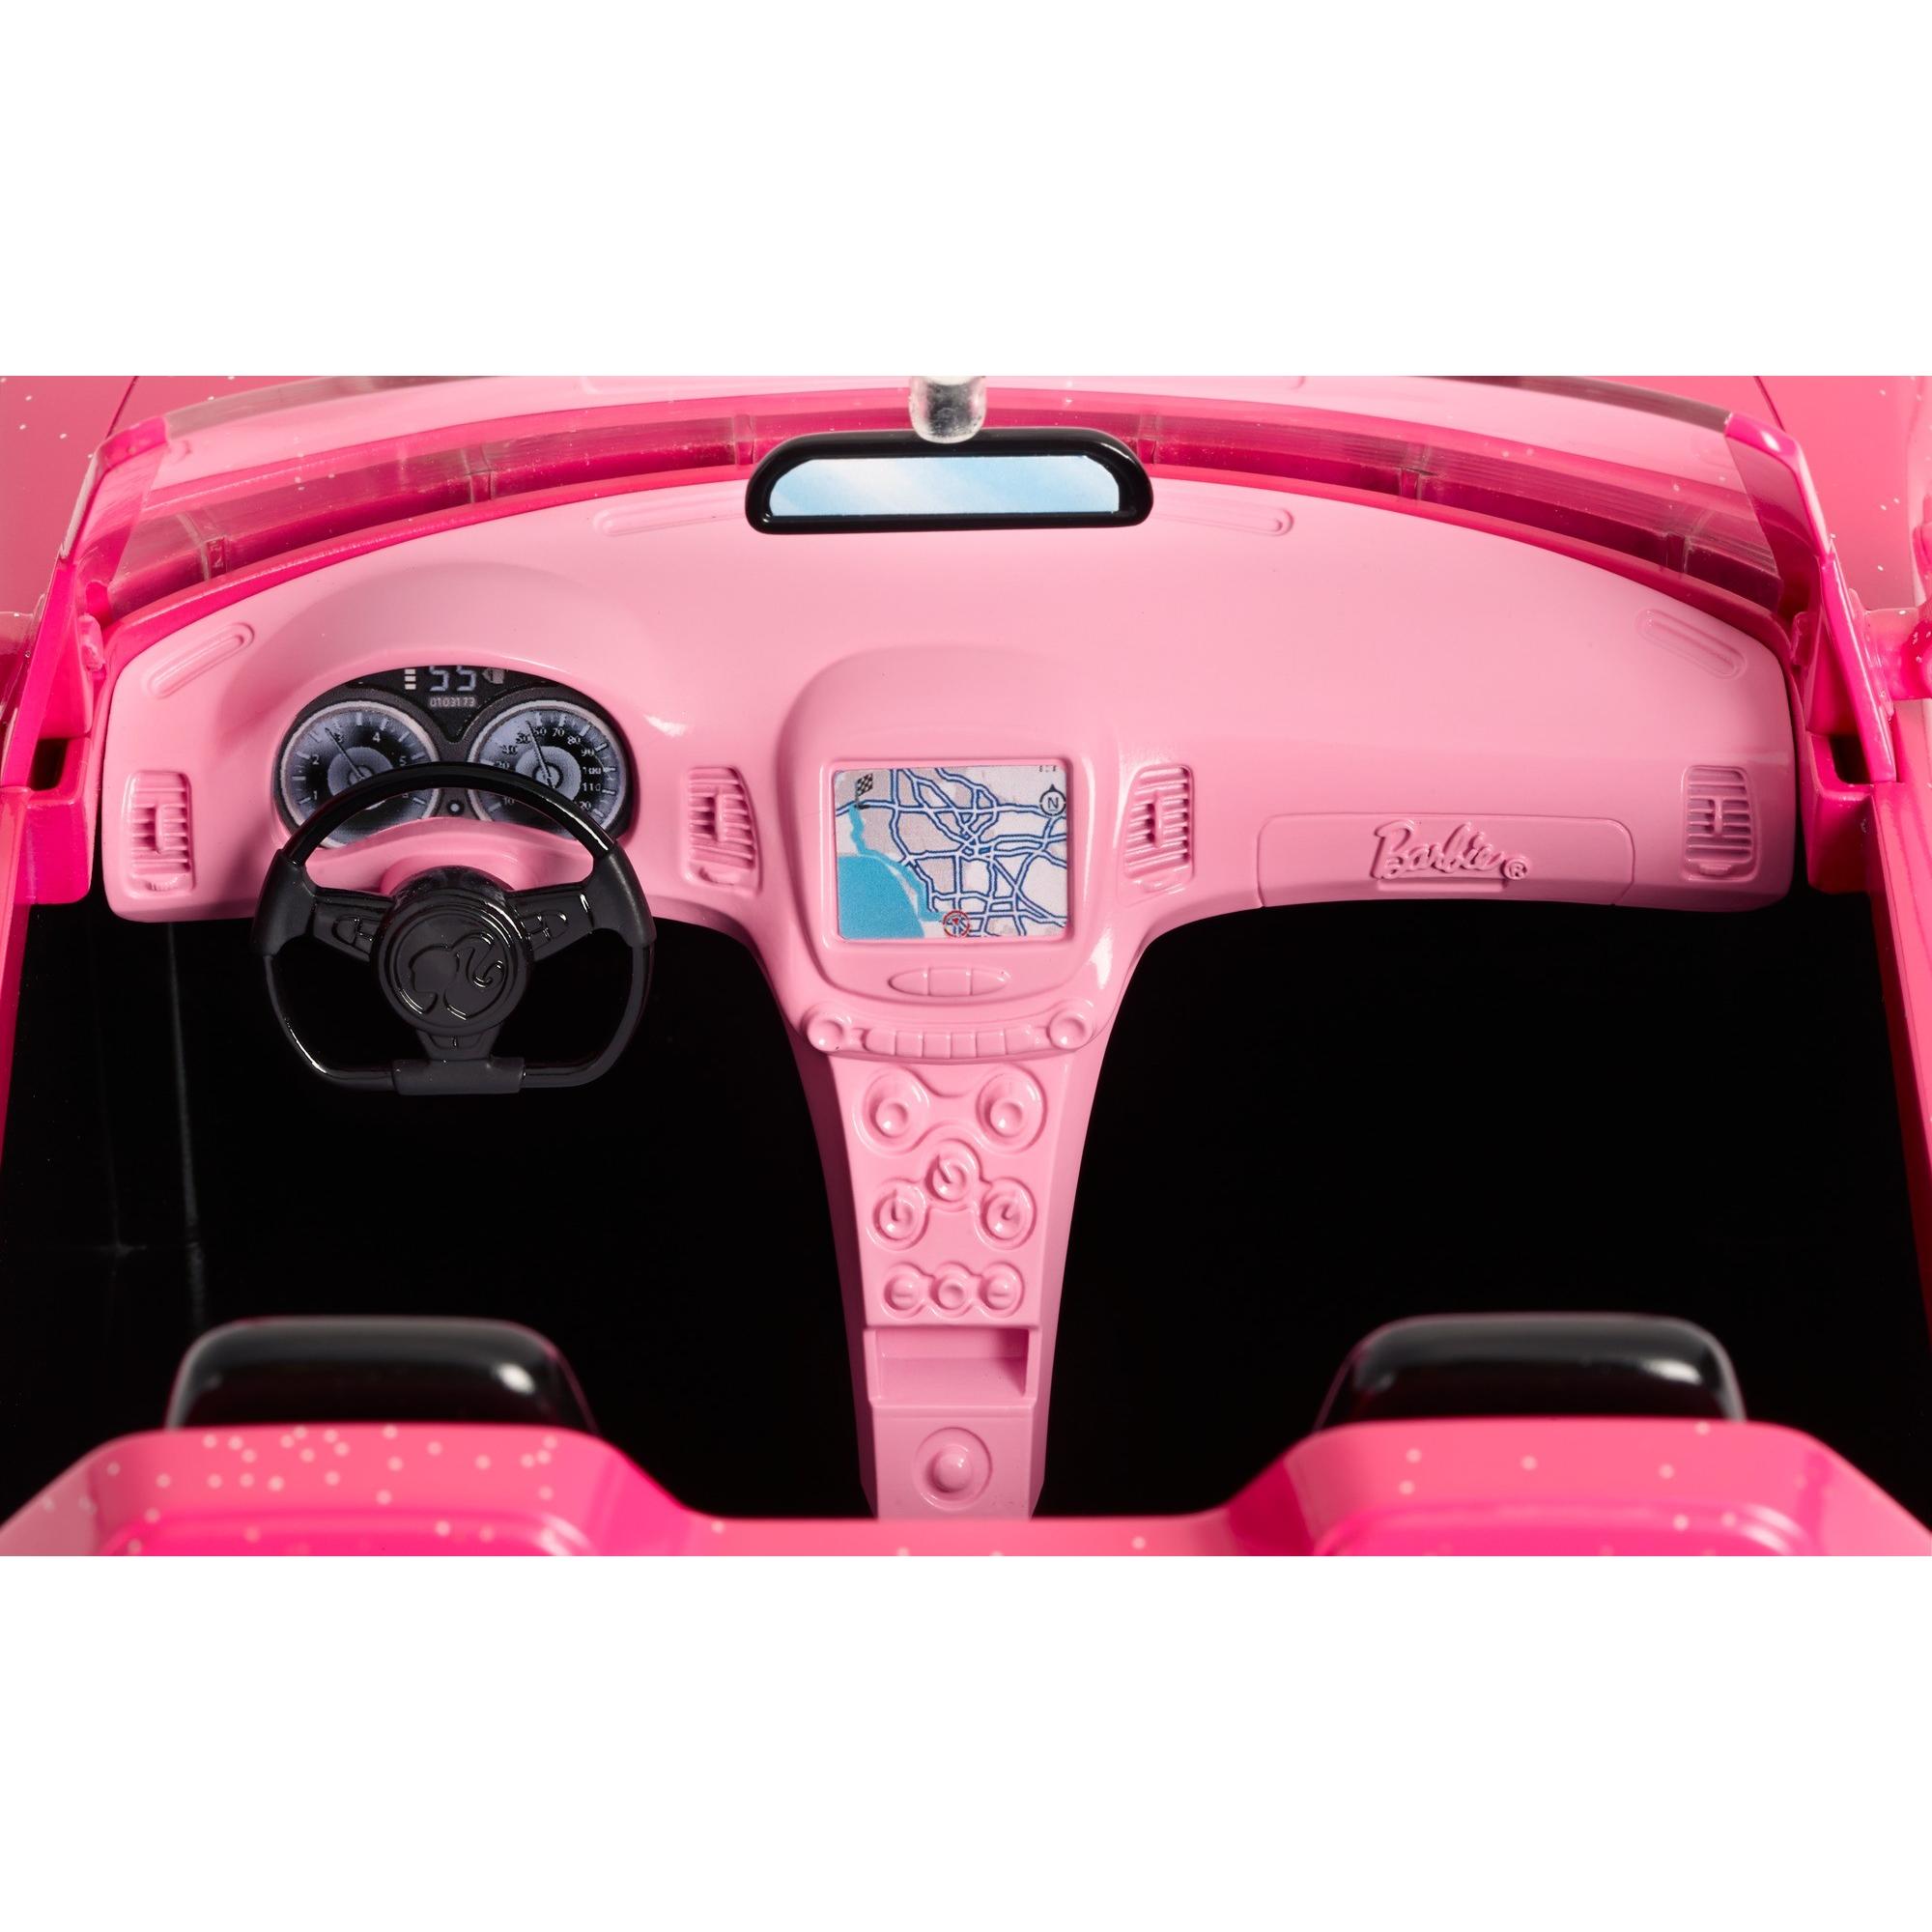 Barbie Convertible Toy Car, Sparkly Pink 2-Seater with Rolling Wheels - image 4 of 7